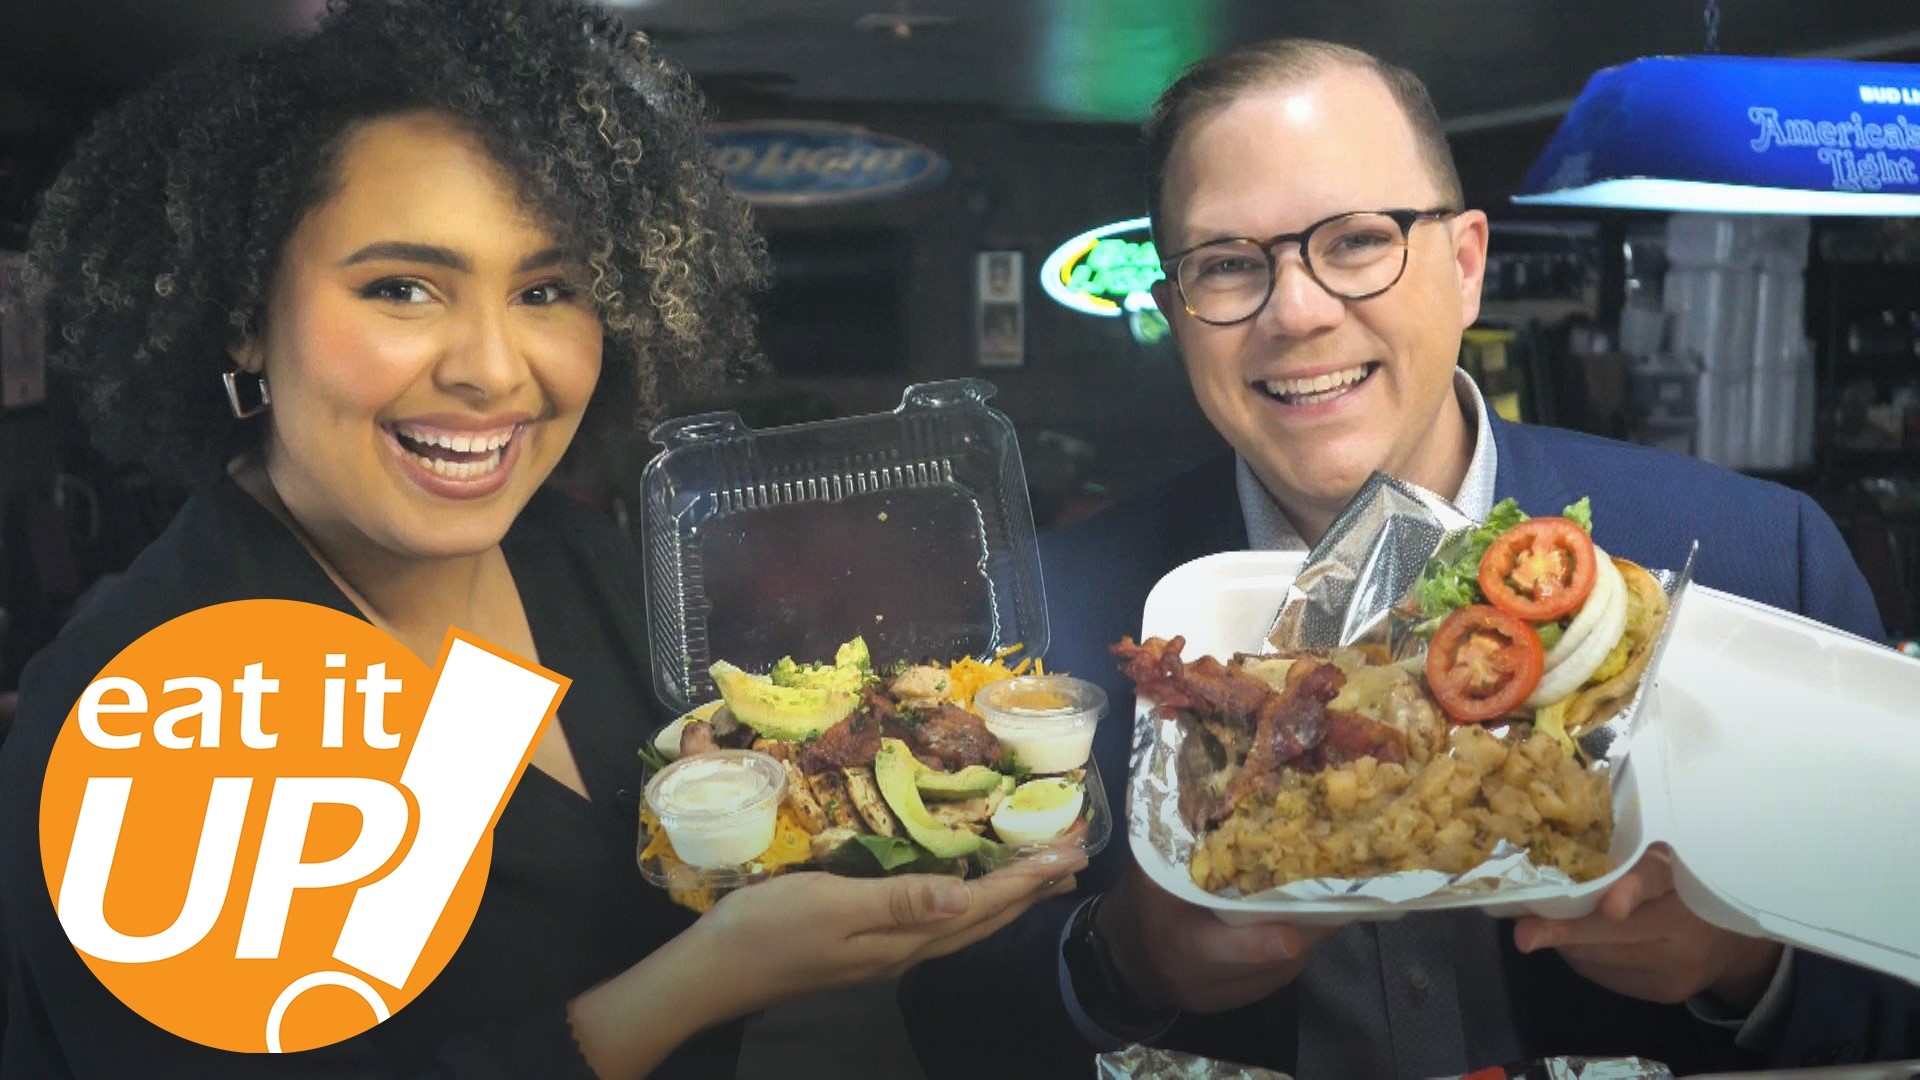 This week, Skot and Mackailyn visit as local restaurant and sample pretty much everything on the menu!